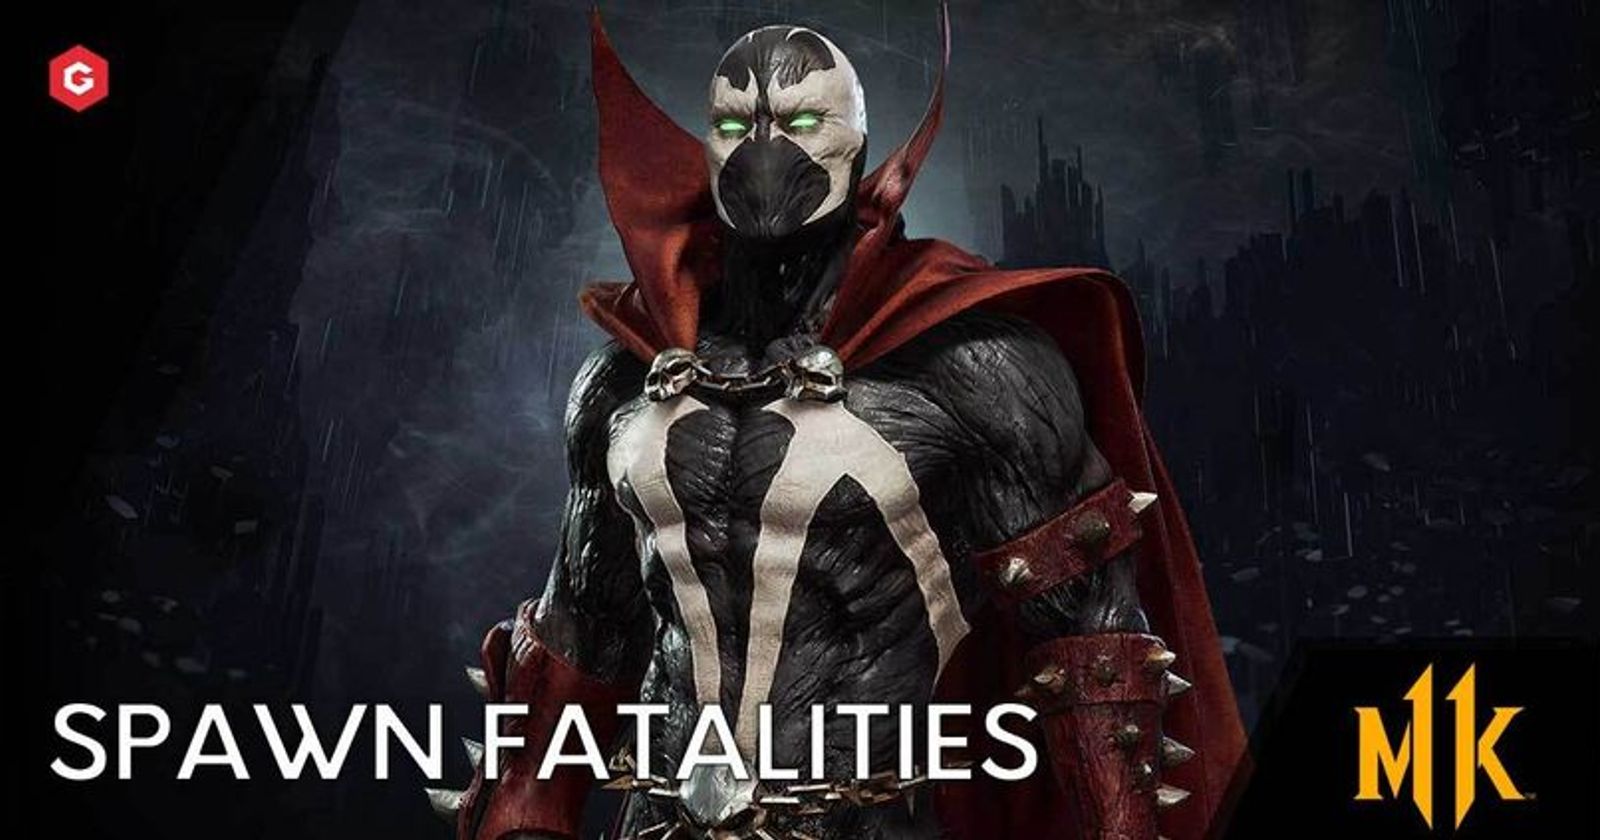 Mortal Kombat 11' Fatalities: How to Perform Both Finishers